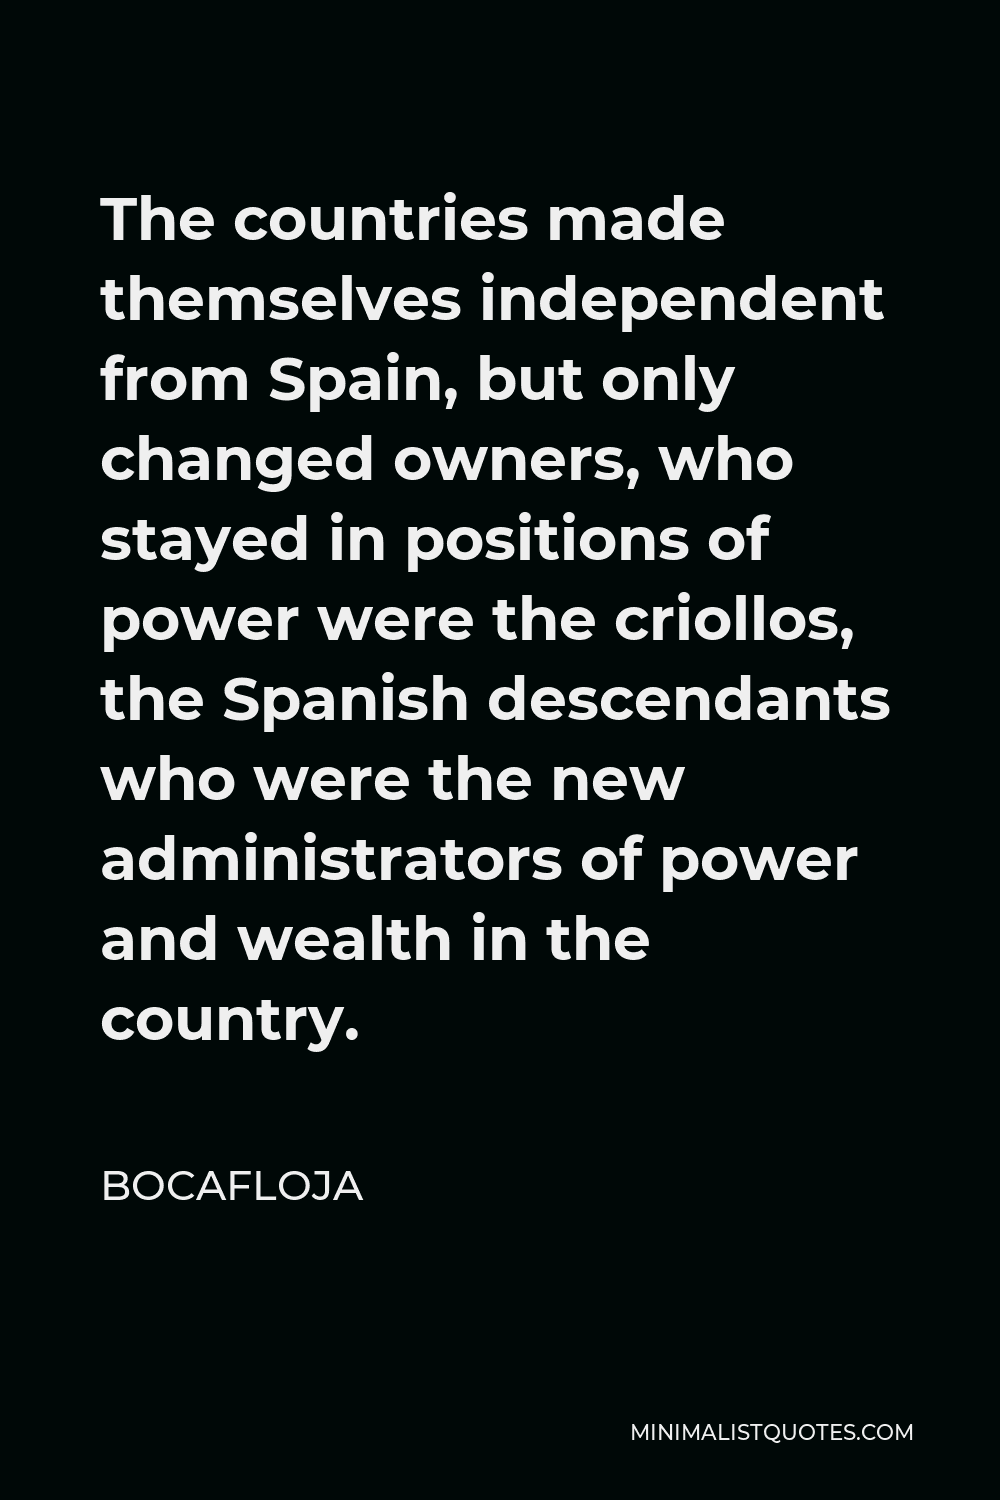 Bocafloja Quote - The countries made themselves independent from Spain, but only changed owners, who stayed in positions of power were the criollos, the Spanish descendants who were the new administrators of power and wealth in the country.